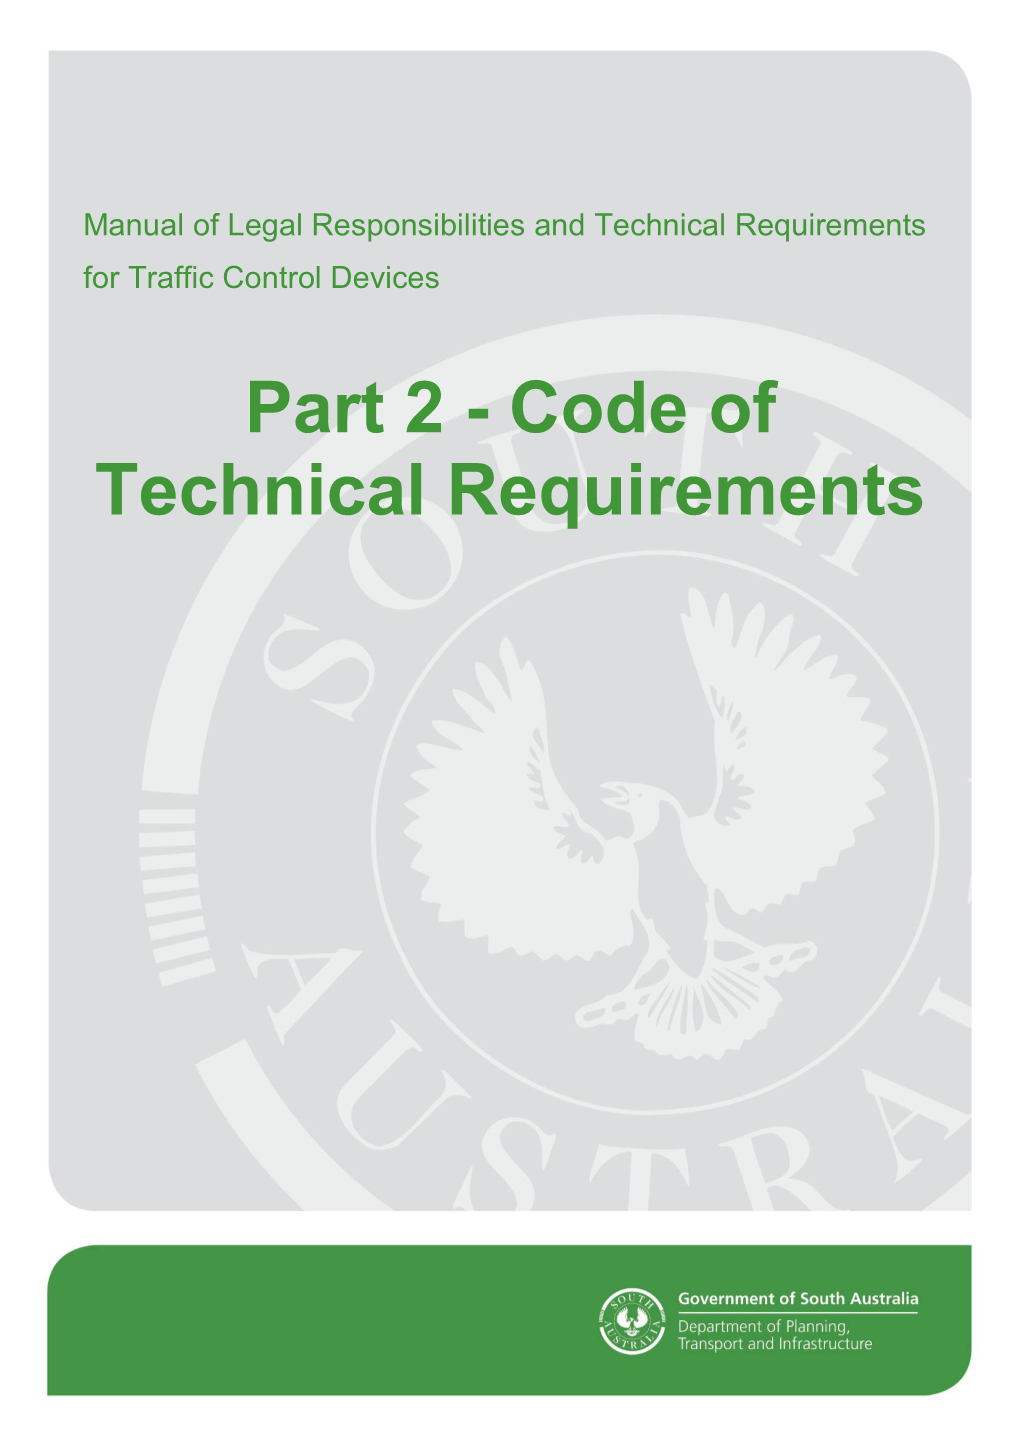 Part 2 - Code of Technical Requirements